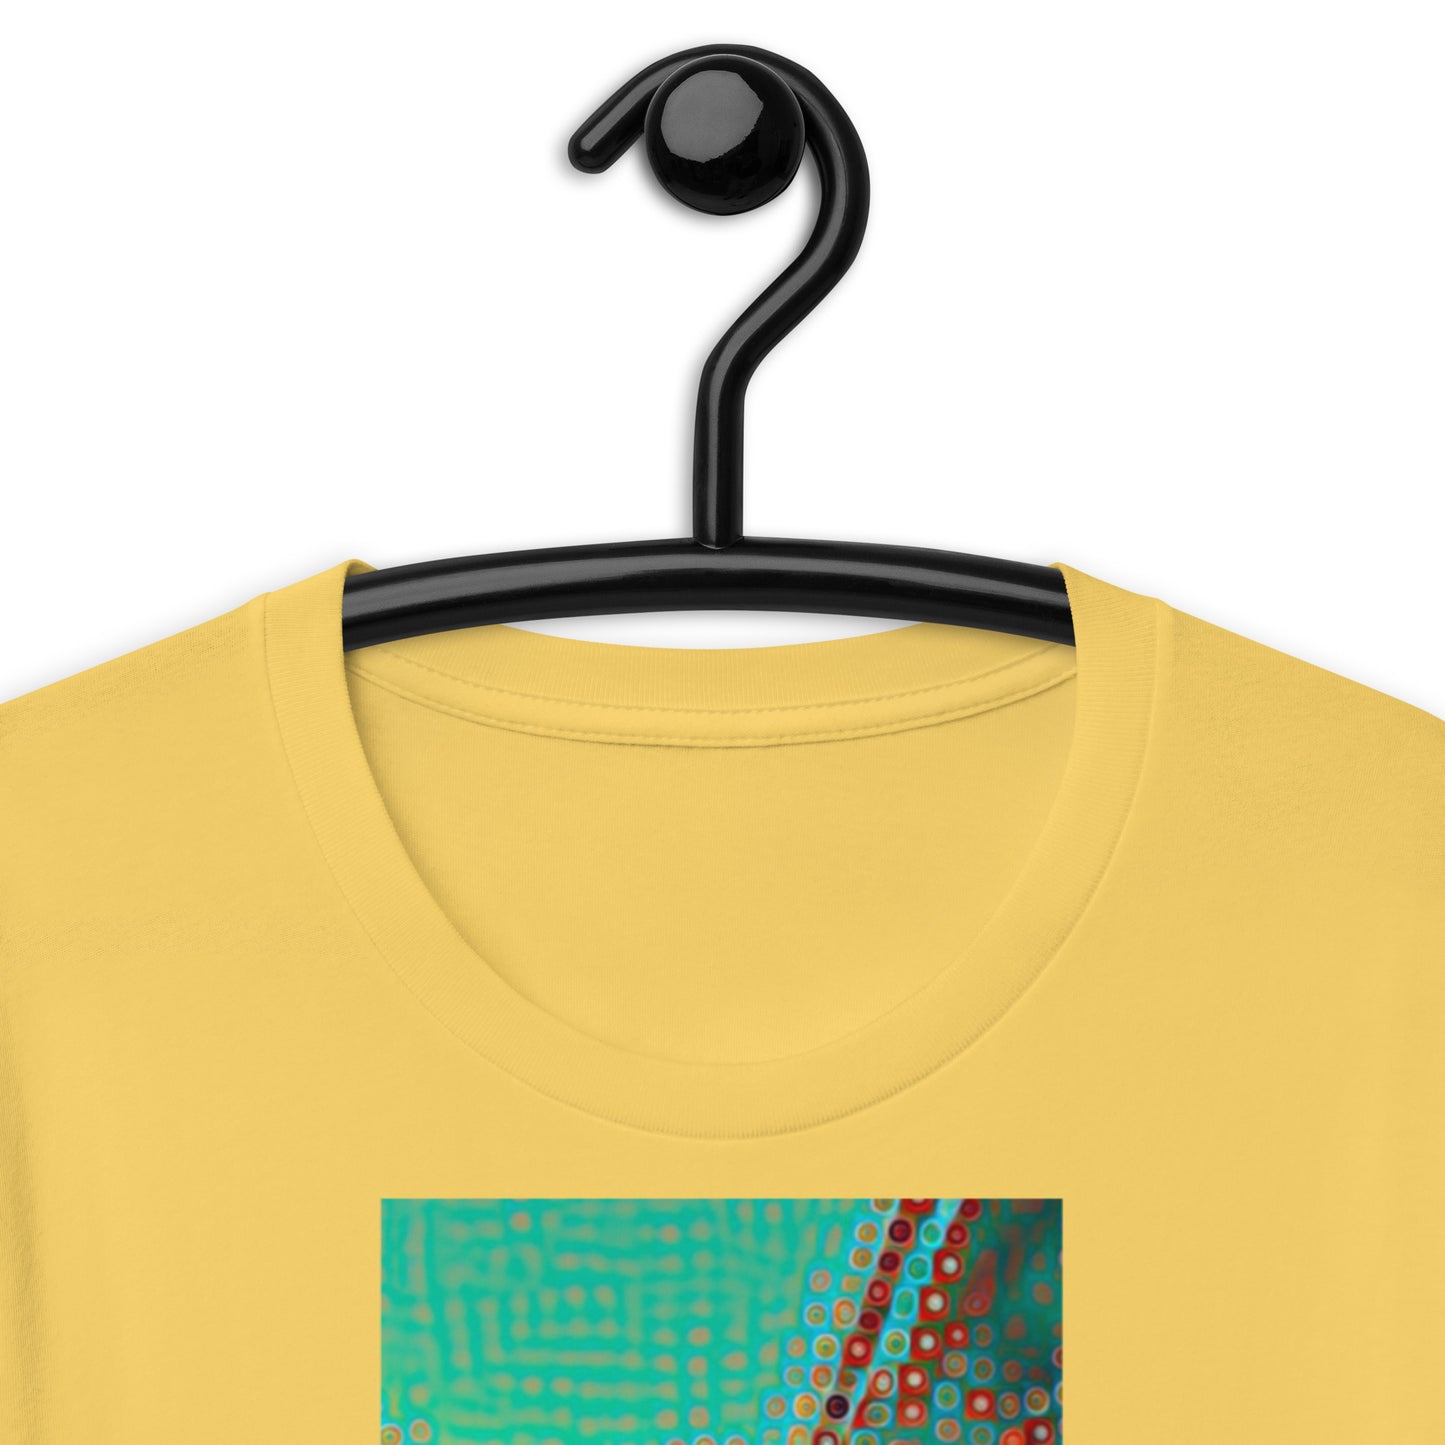 A cereal murderer’s view (t-shirt)